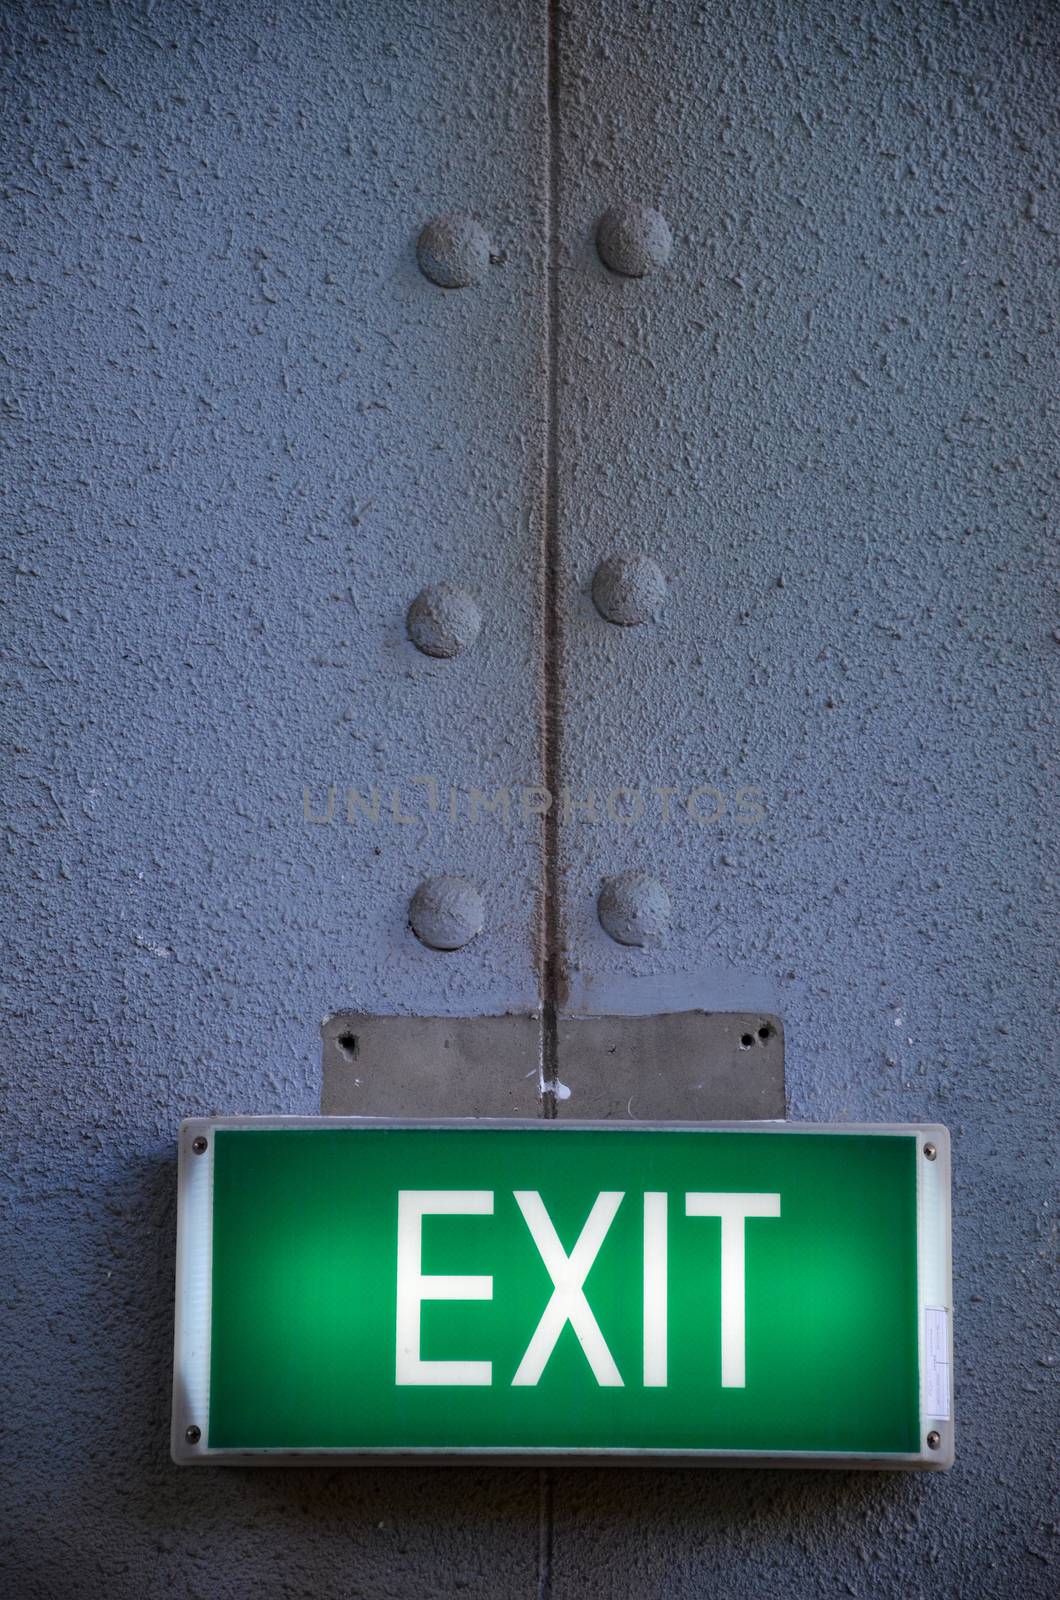 Exit sign points the way out by tang90246